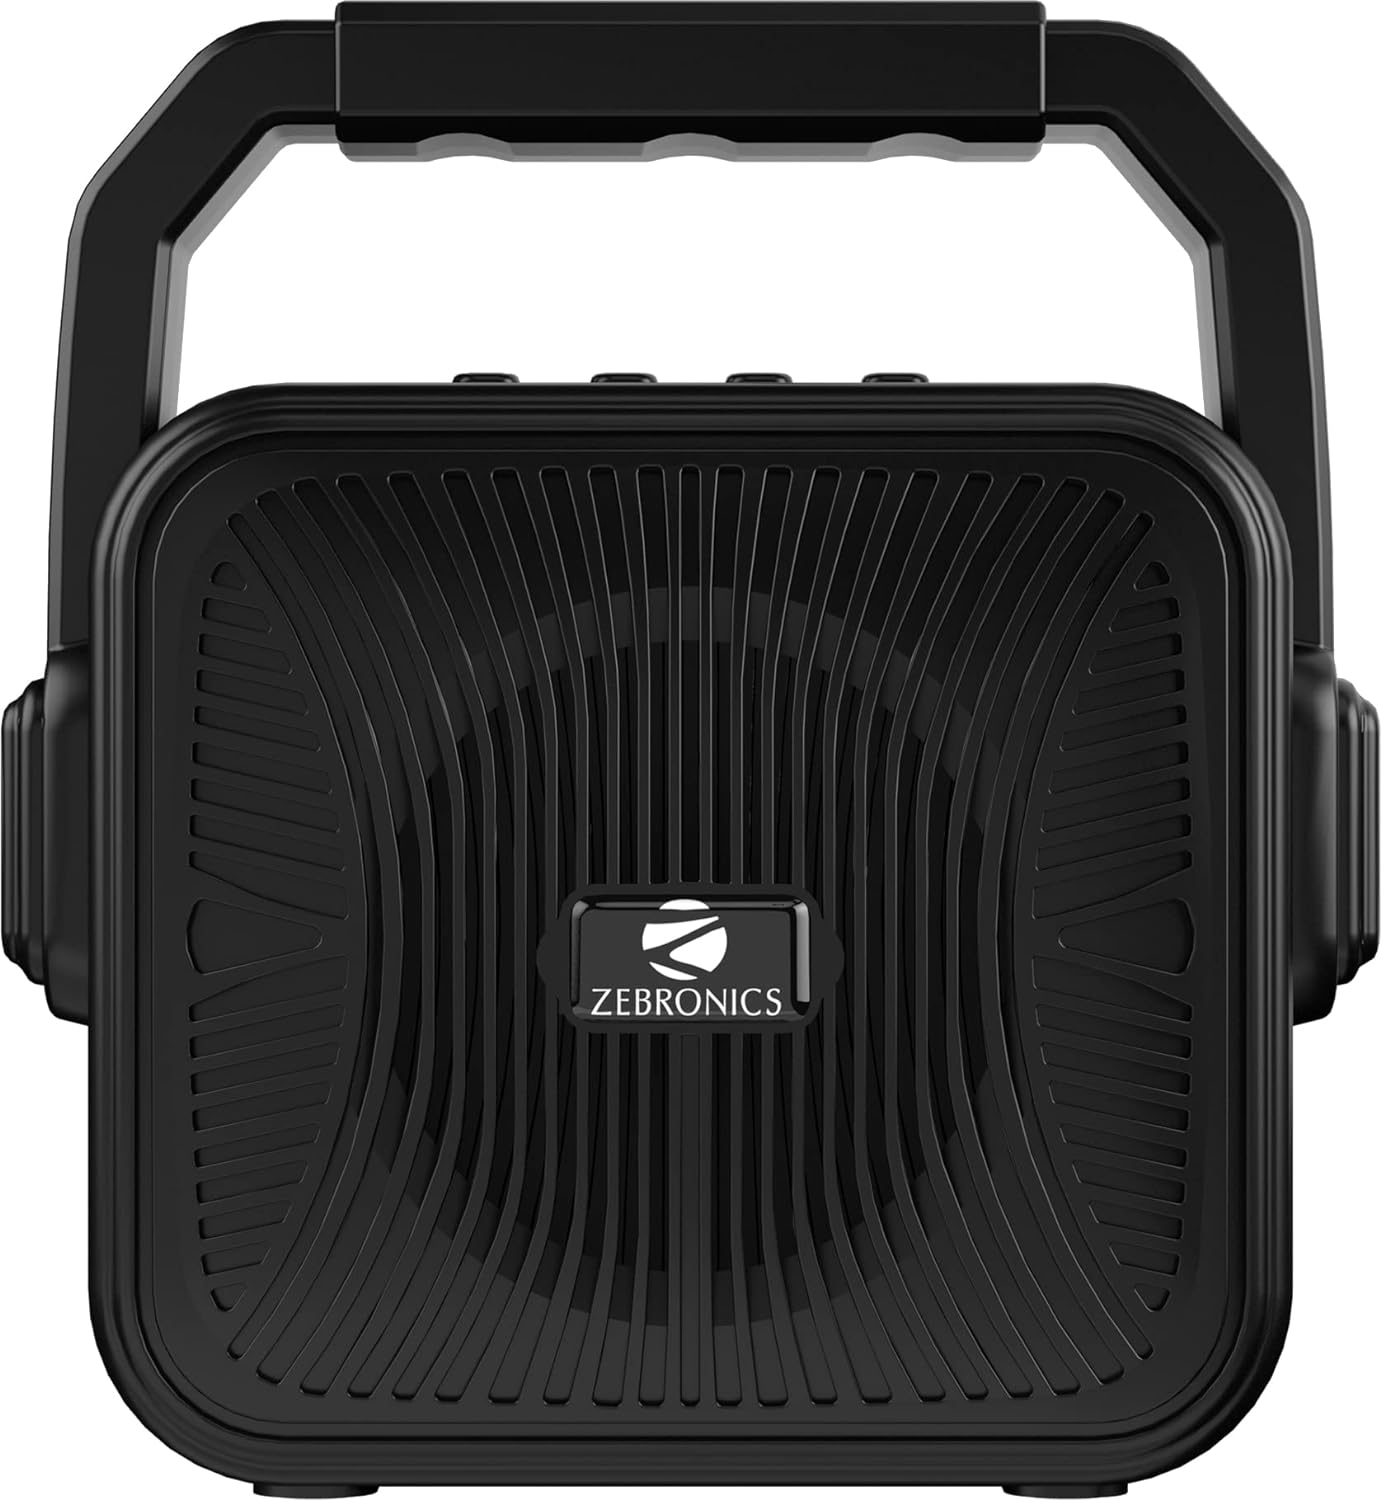 ZEBRONICS Zeb-County 2 Portable Wireless Speaker Supporting Bluetooth v5.0, FM Radio, Call Function, Built-in Rechargeable Battery, USB/Micro SD Card Slot, 3.5mm AUX Input, TWS (Black)